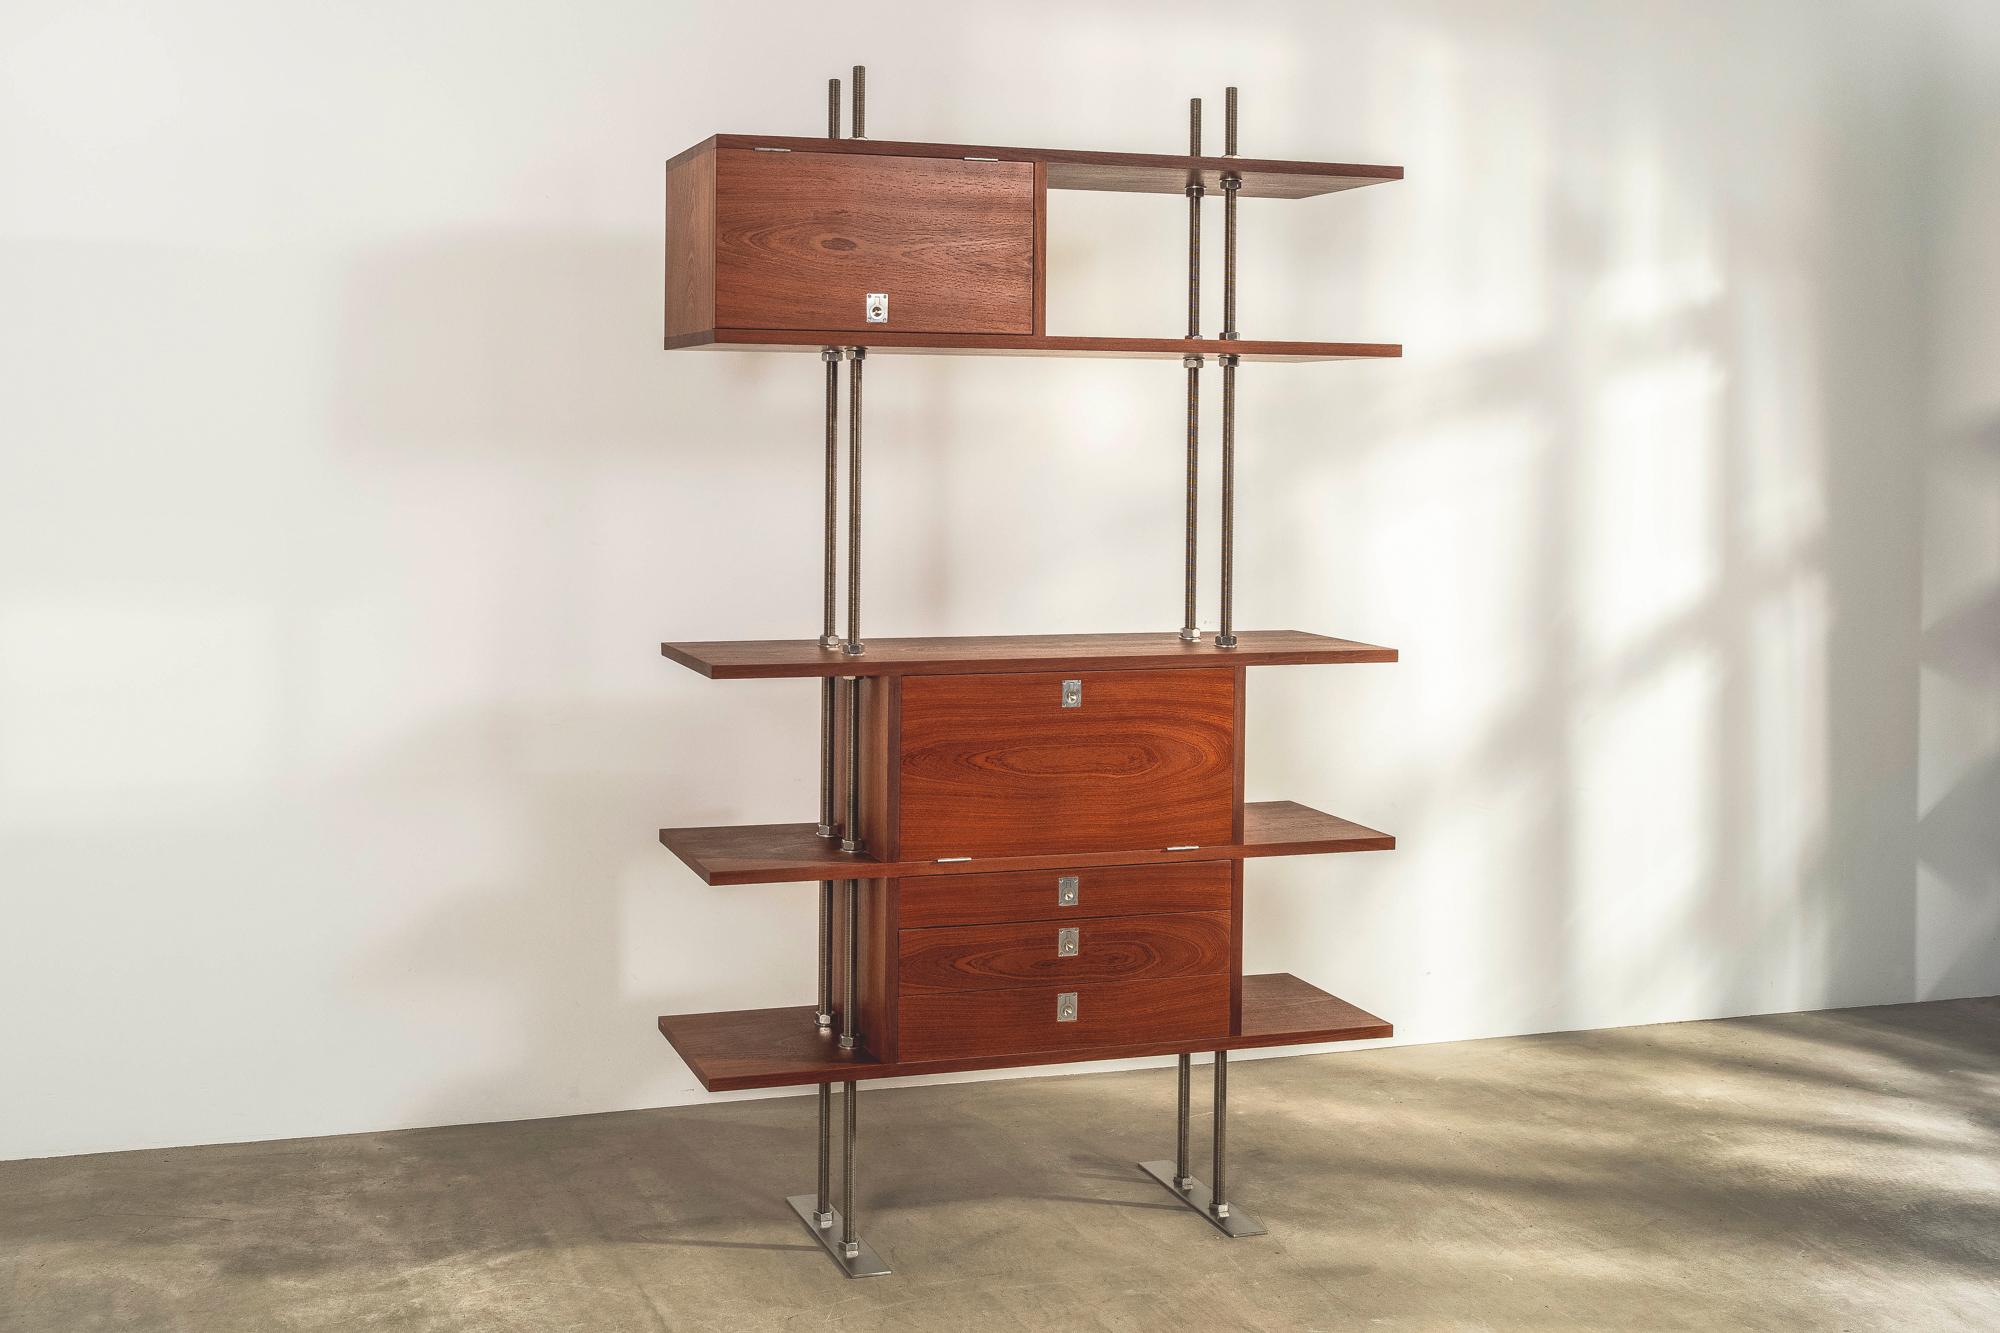 Designed by Lord Snowdon in the 1960s and manufactured in 2011, this one-off cabinet has remarkable provenance. 

The revered British photographer and filmmaker, who married Princess Margaret, the sister of Queen Elizabeth II, was also a talented